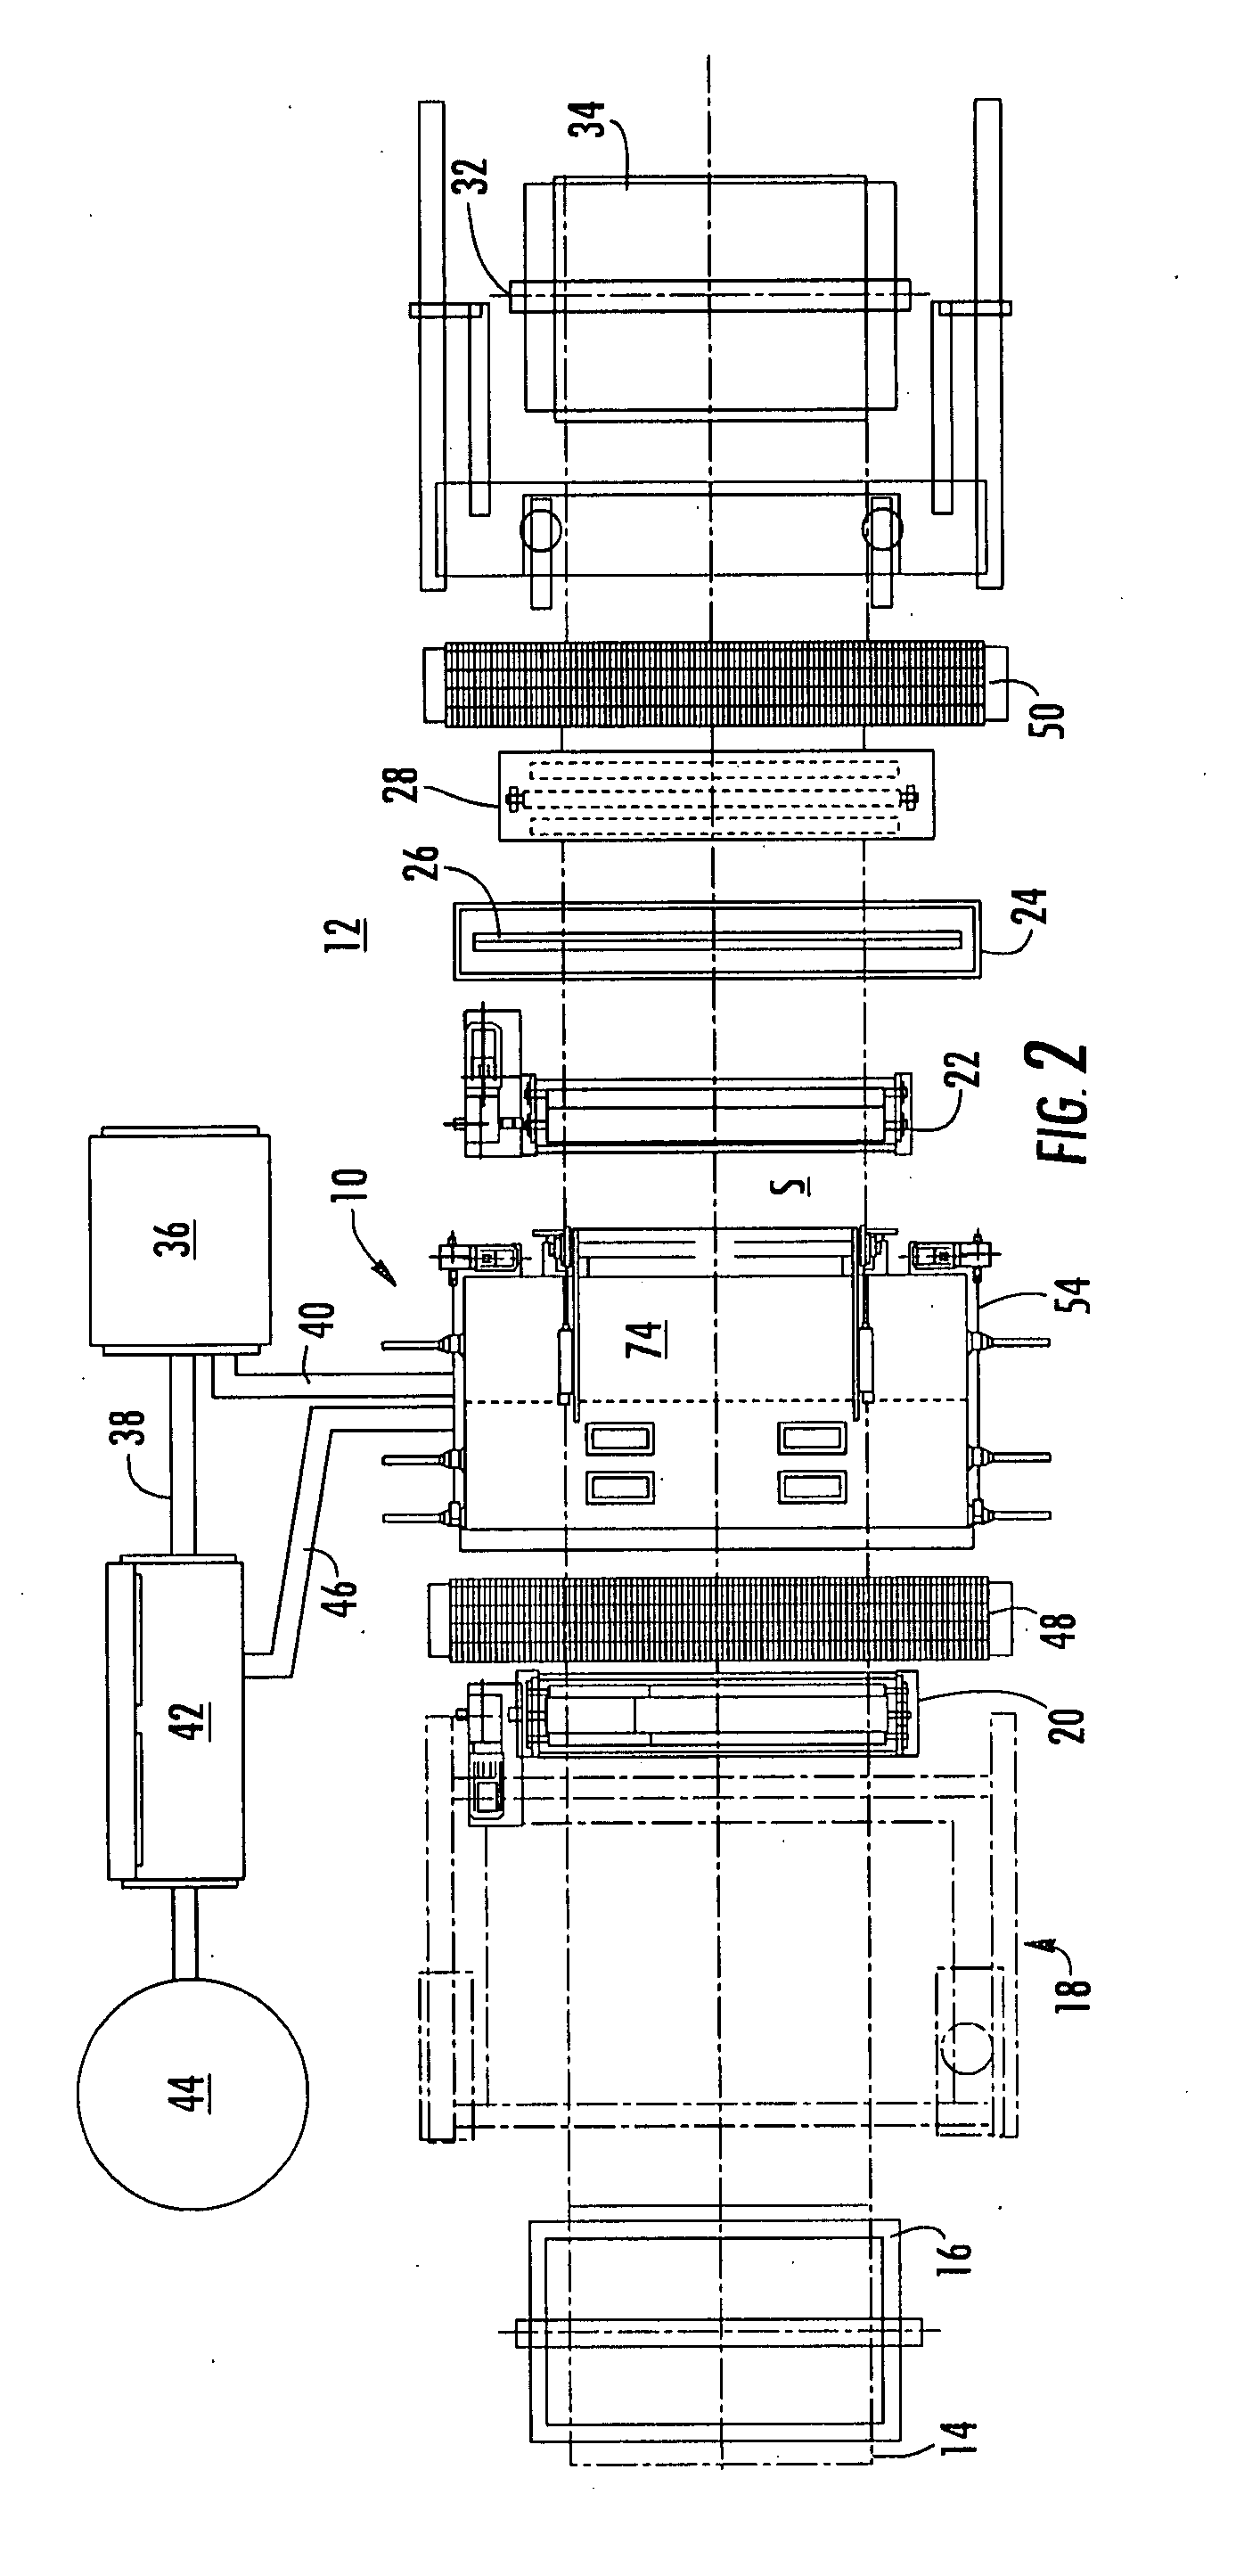 Method and apparatus for dyeing cellulosic textile substrates with a leuco-state dye